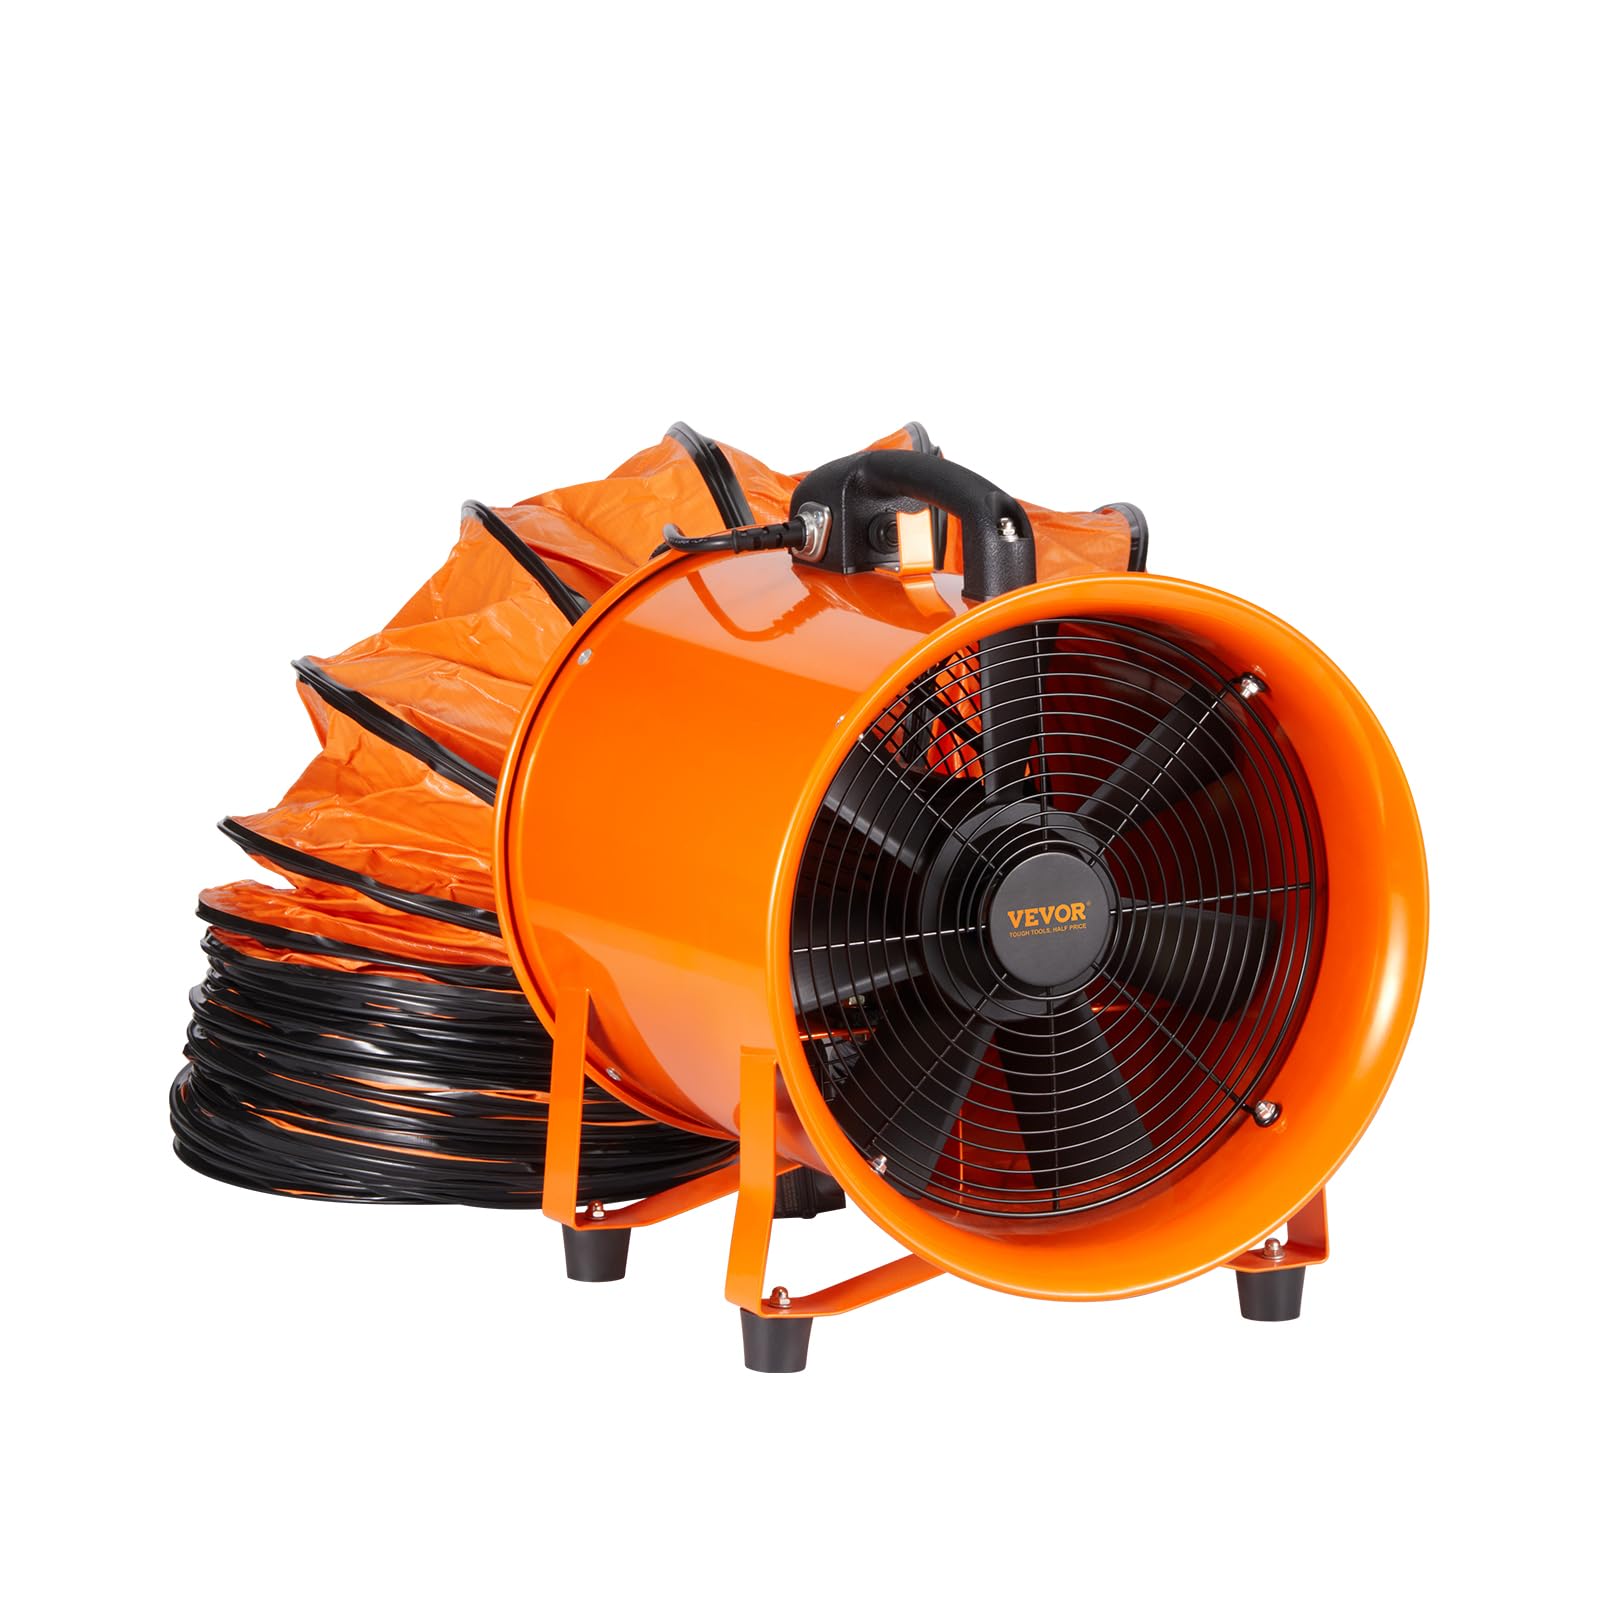 VEVOR Portable Utility Blower Fan, 12 Inch 585W 3198 CFM Heavy Duty Cylinder Axial Exhaust Fan with 33ft Duct Hose, Industrial Ventilator for Ventilating Workshops, Confined Space